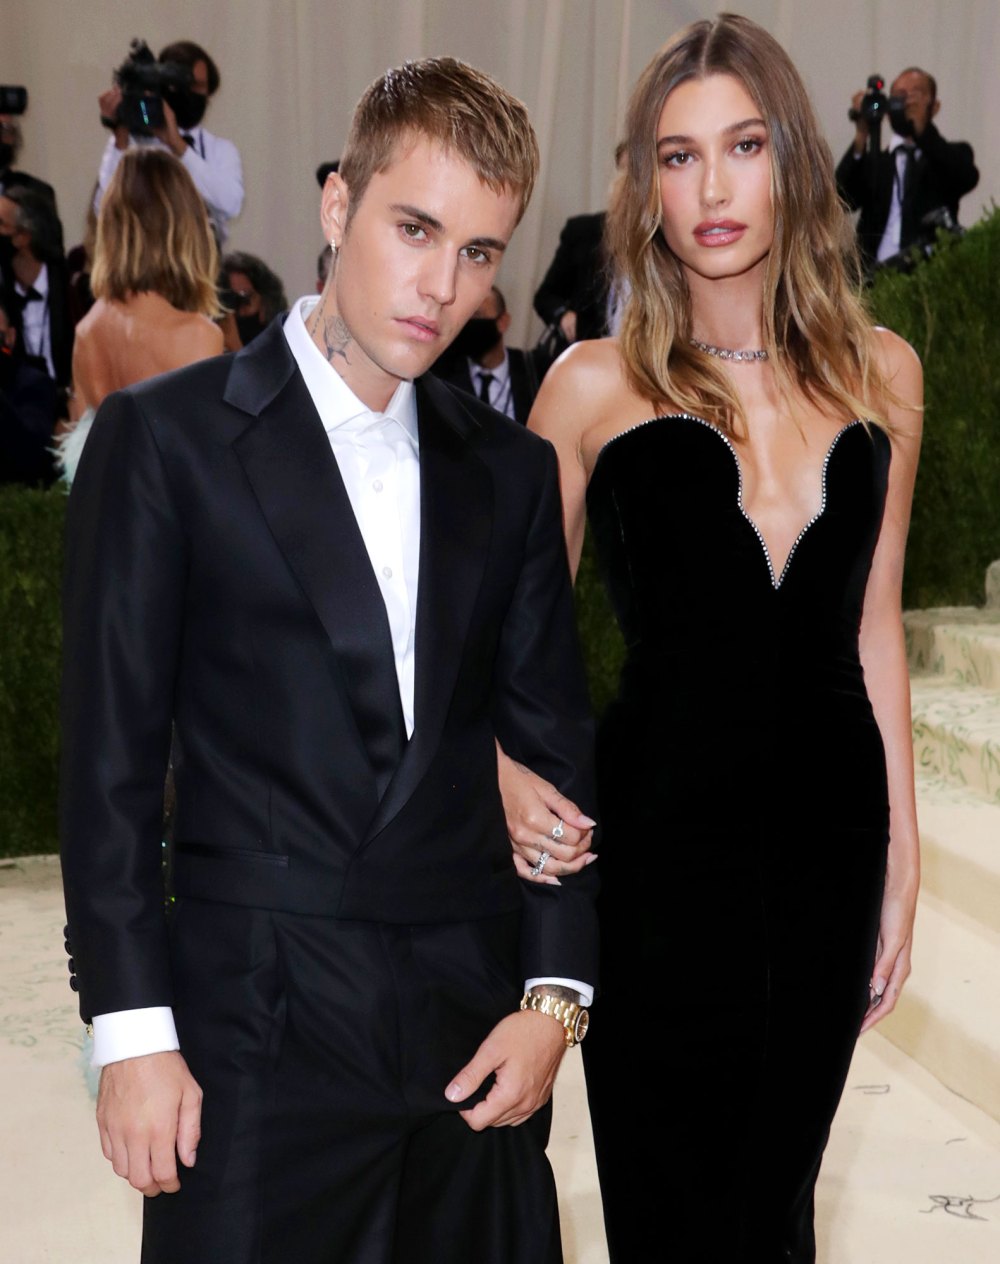 Hailey Bieber Scared to Start a Family With Husband Justin Bieber